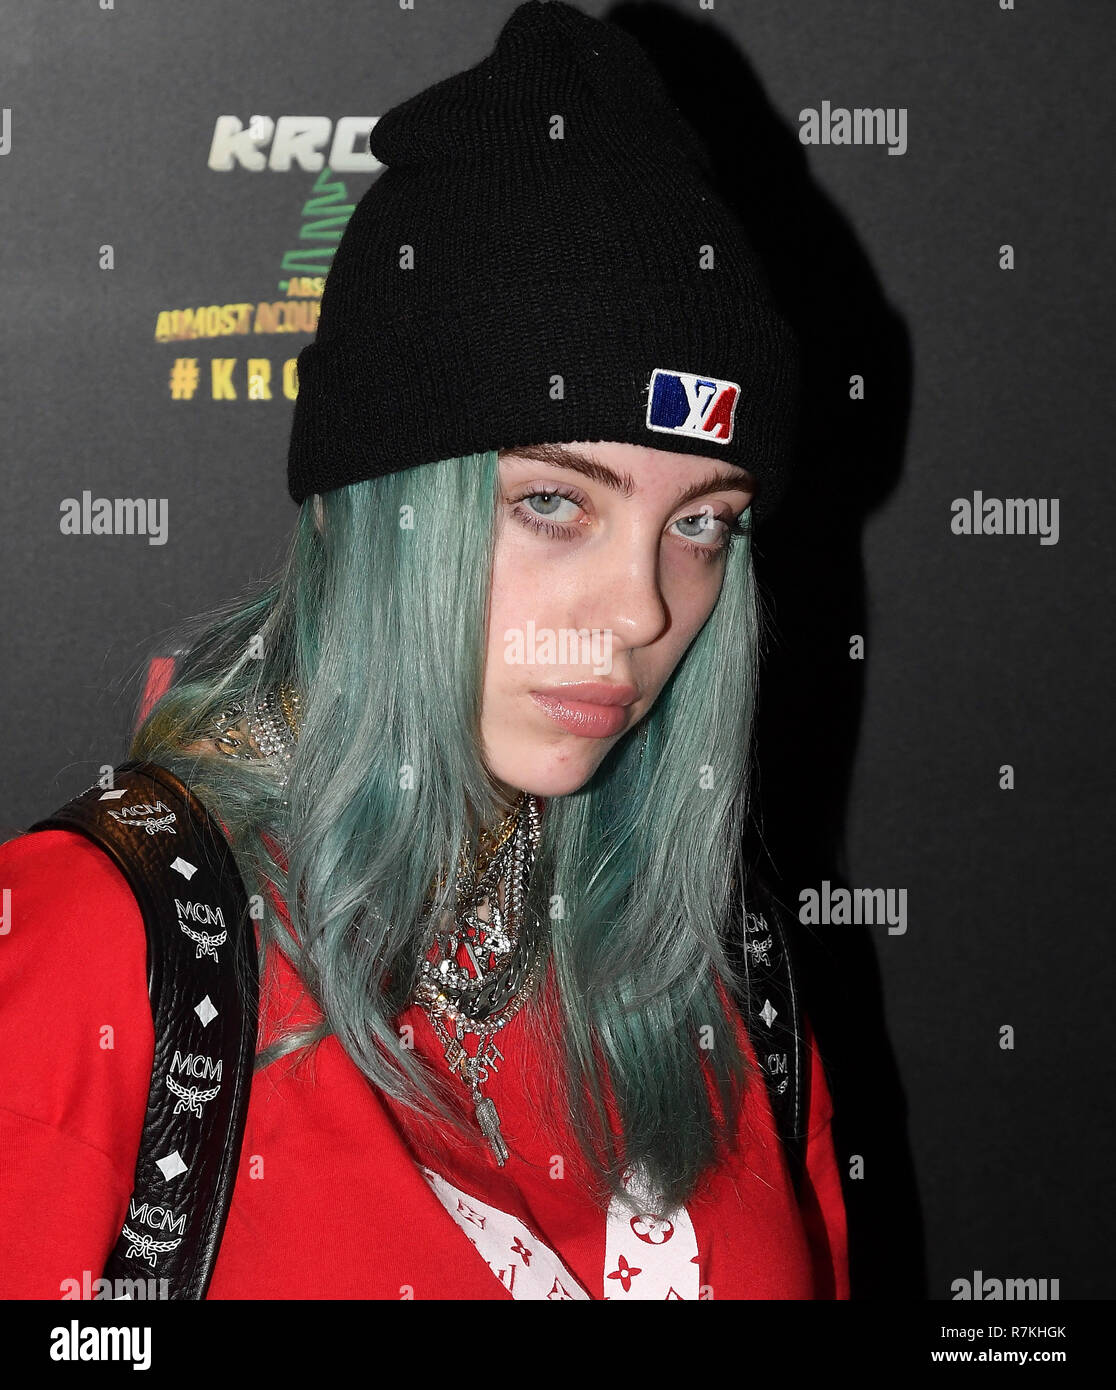 INGLEWOOD, CA - DECEMBER 09: Billie Eilish poses backstage during KROQ Absolut Almost Acoustic Christmas 2018 at The Forum on December 9, 2018 in Inglewood, California. Photo: imageSPACE/MediaPunch Stock Photo